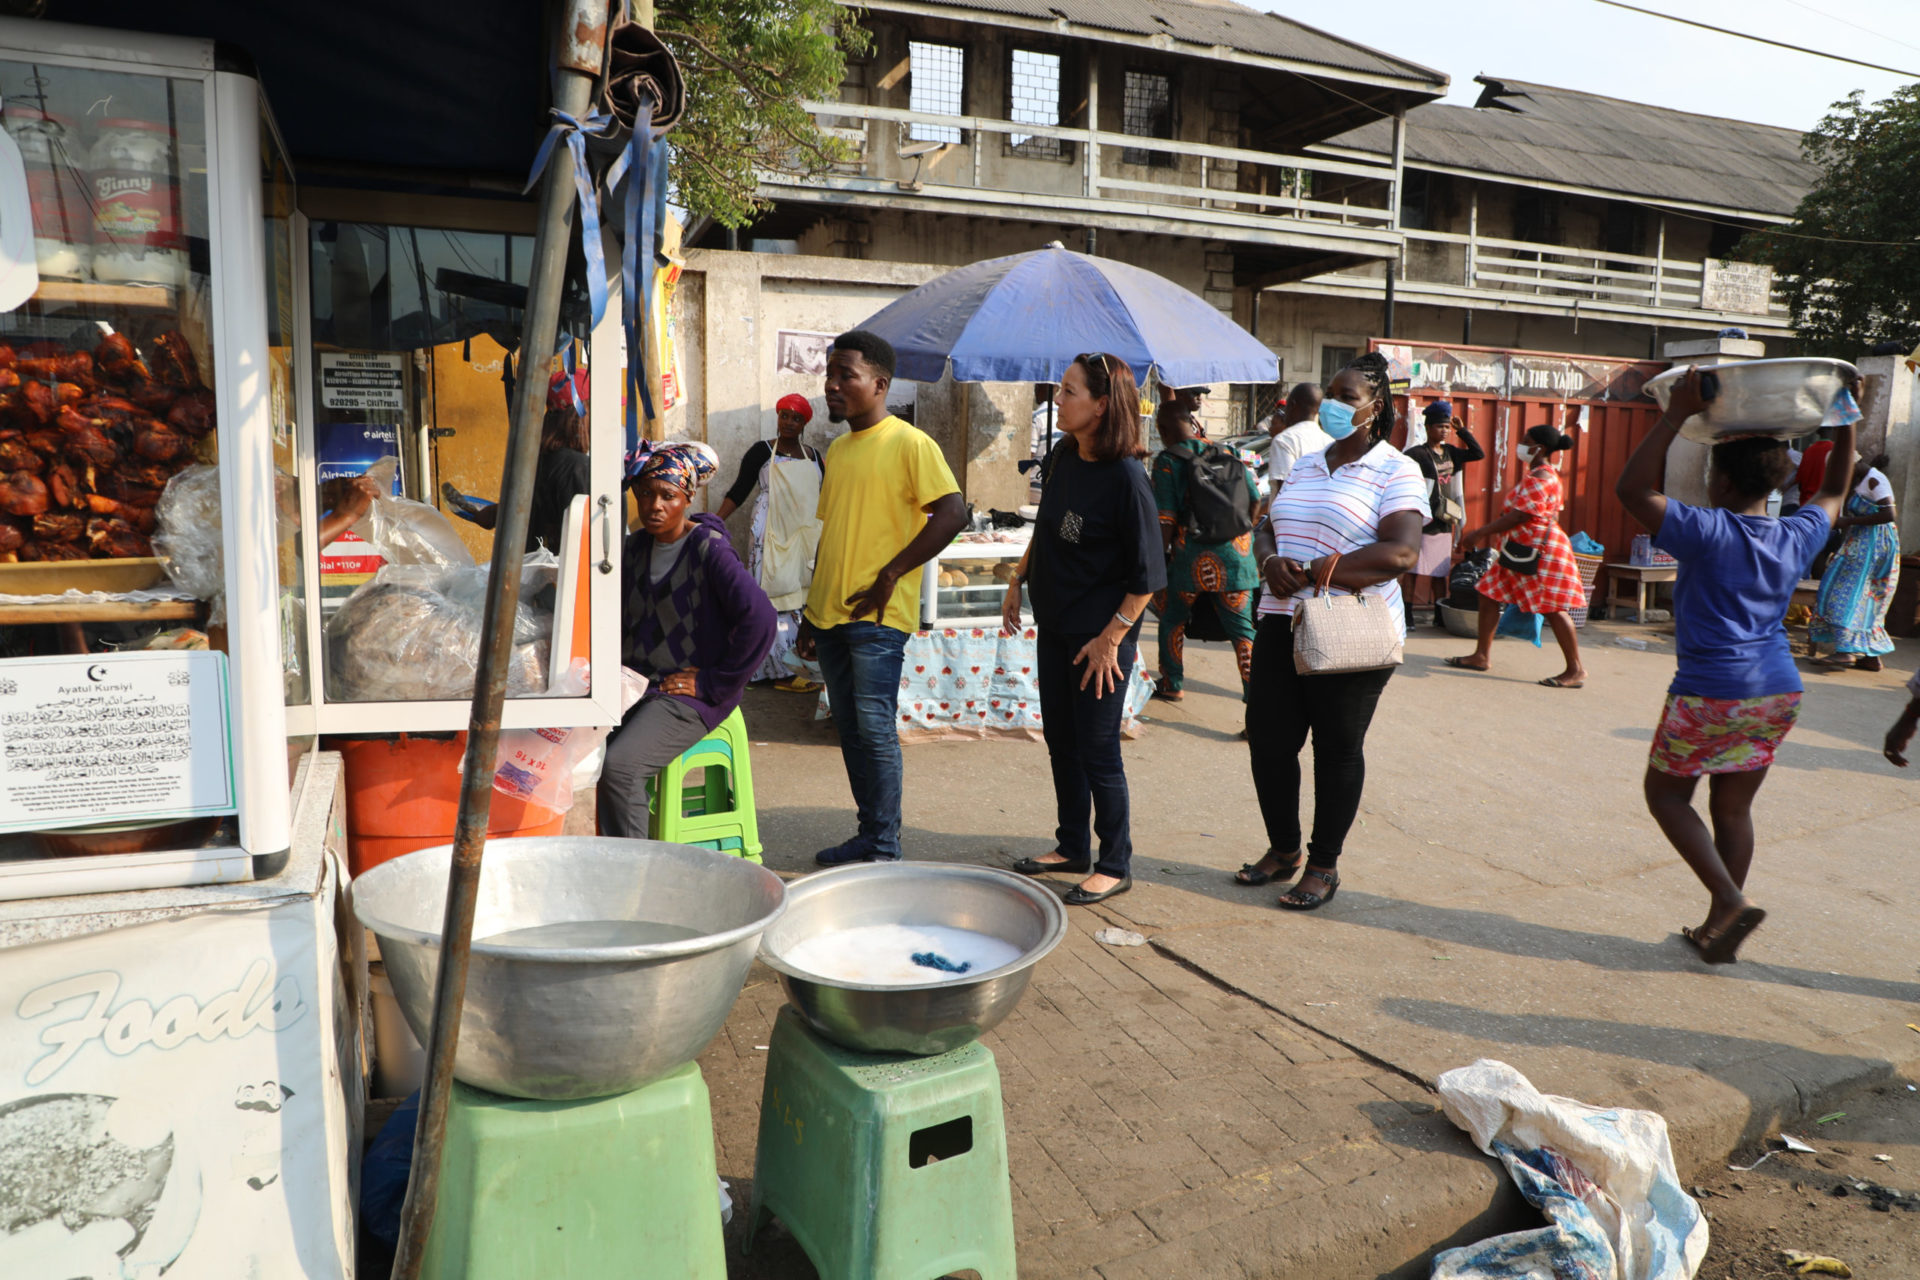 France Ambassador To Ghana, H.E Sophie Avé Spotted In A Queue To Buy Waakye (+Photos)